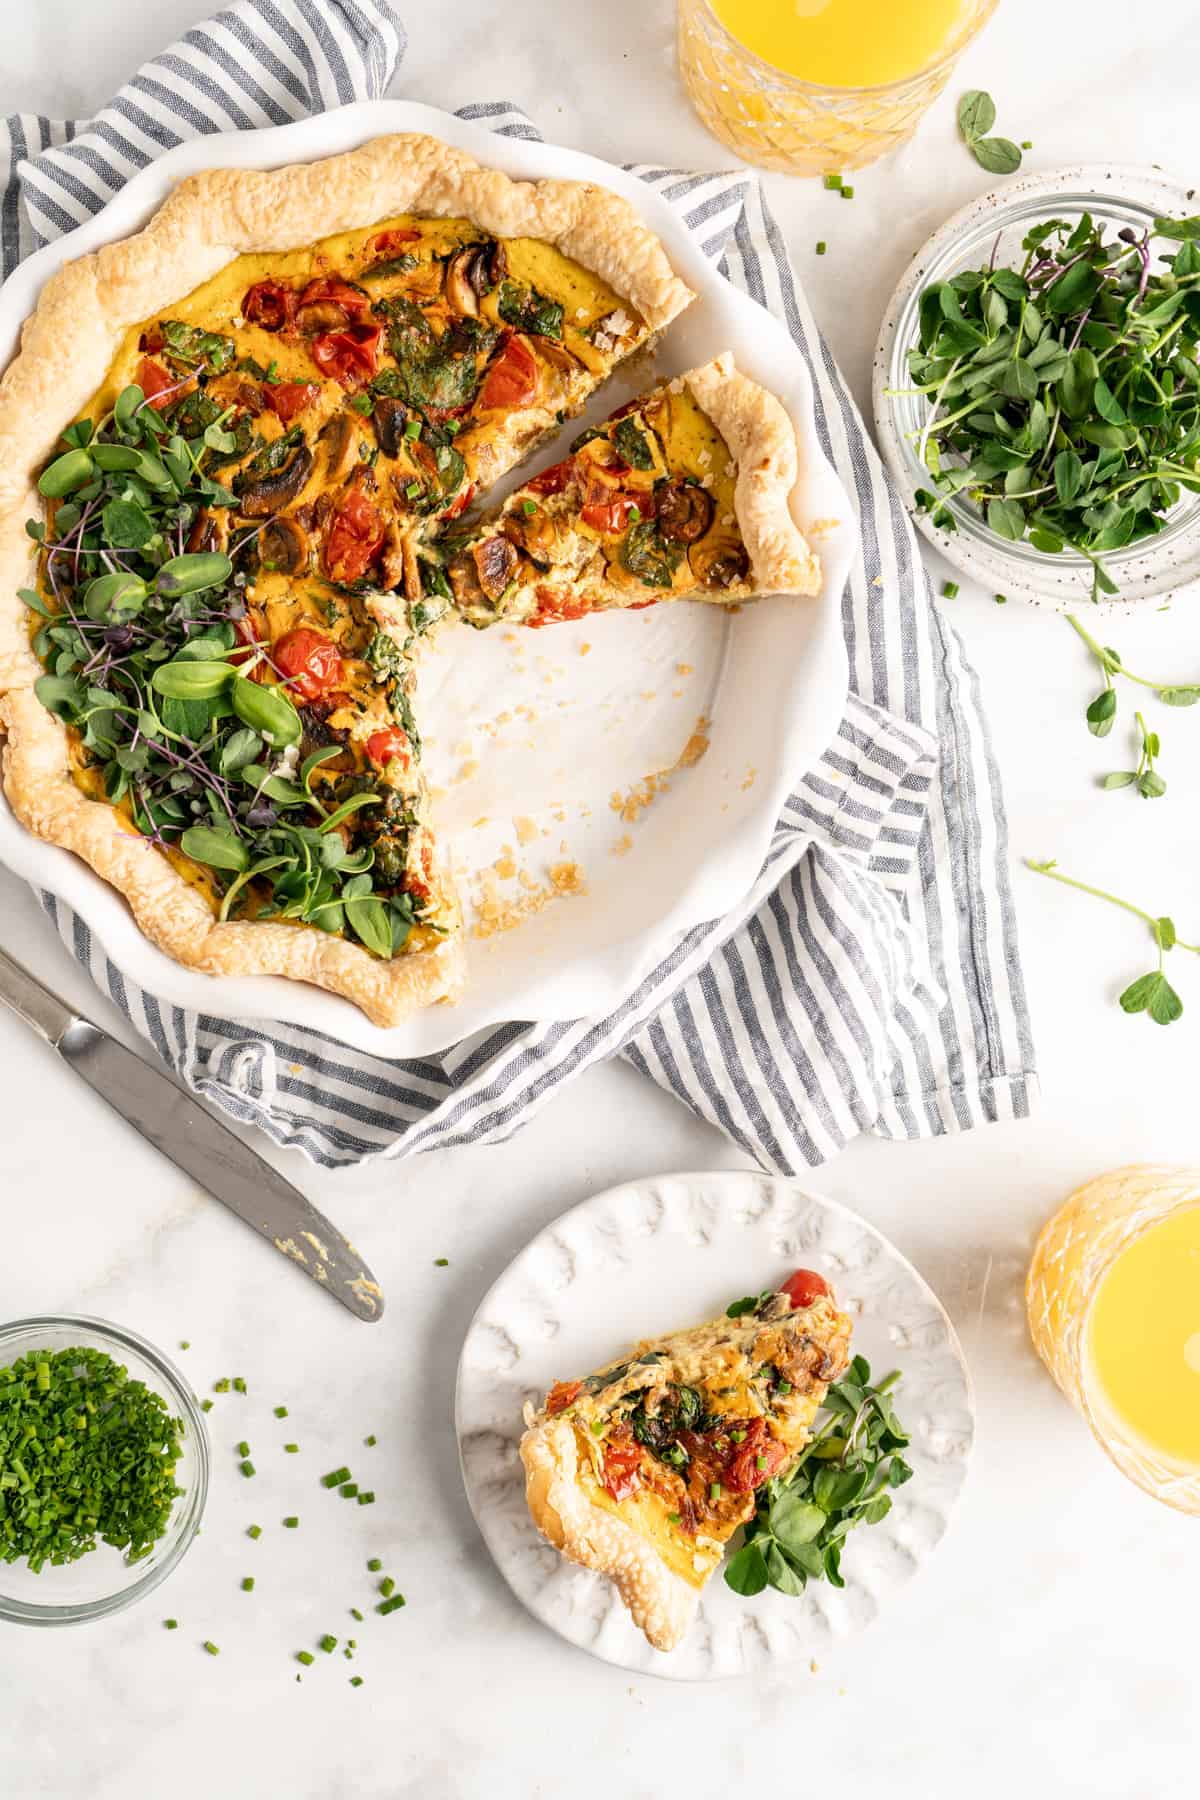 Overhead view of vegan quiche in baking dish with one slice plated